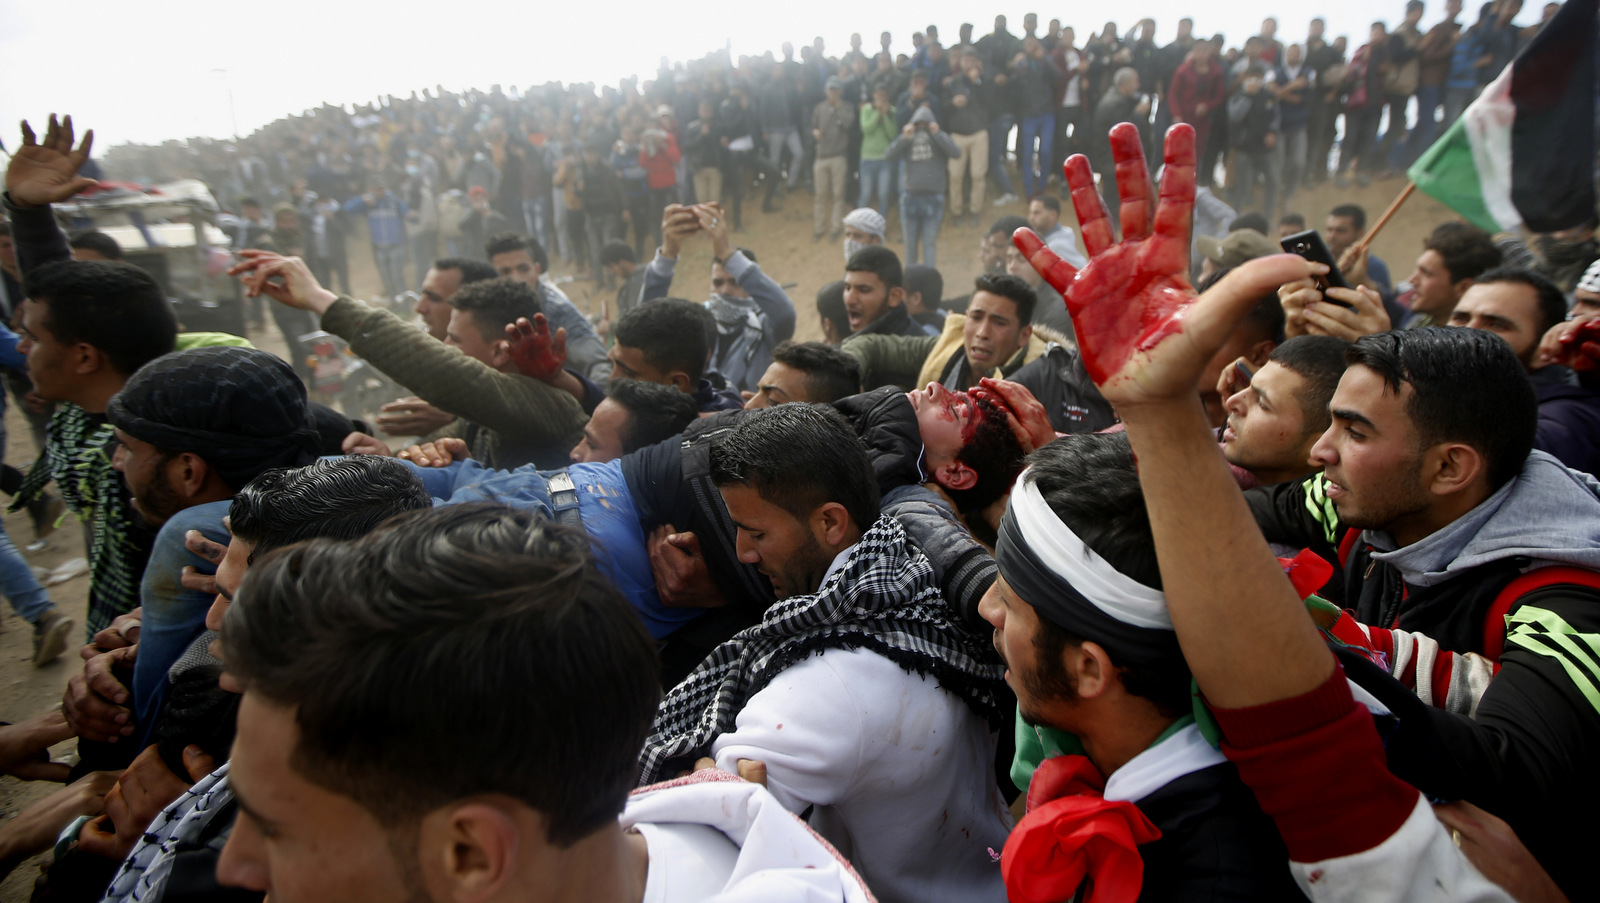 Palestinian protesters evacuate a wounded youth during clashes with Israeli troops along the Gaza Strip border with Israel, east of Khan Younis, Gaza Strip, Friday, March 30, 2018. (AP Photo/Adel Hana)